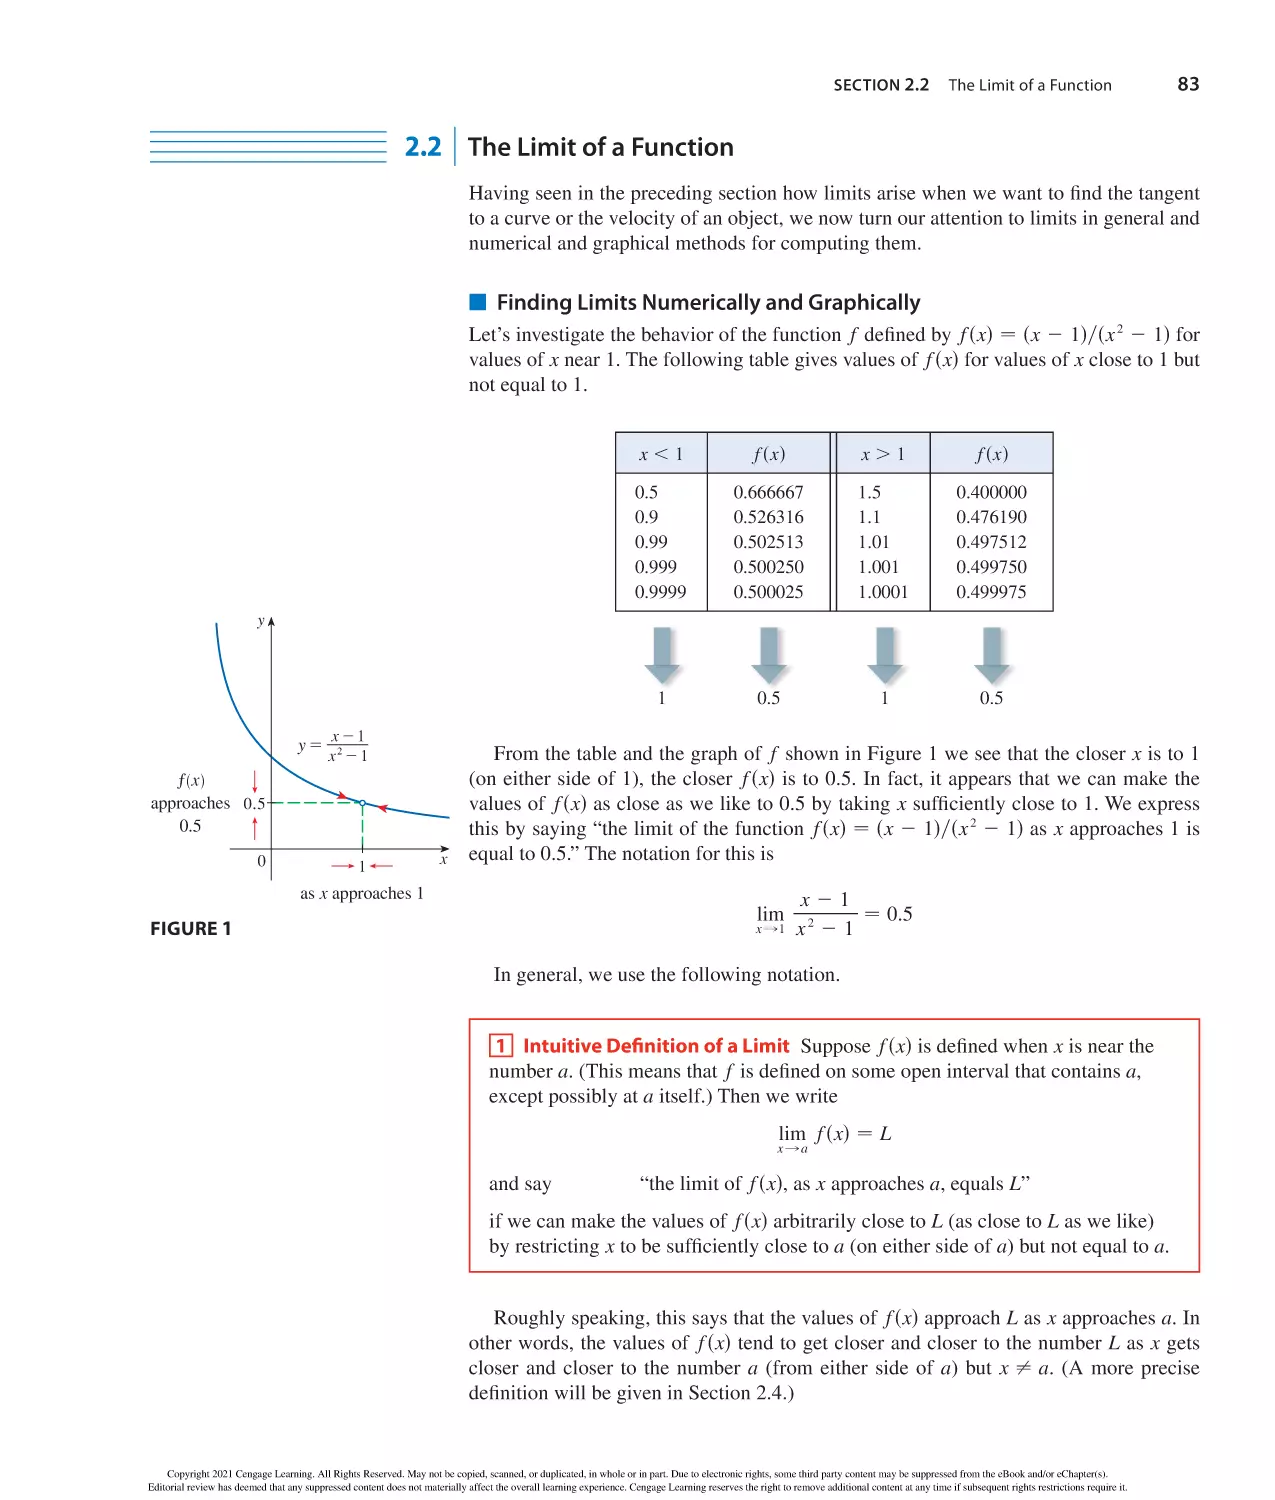 2.2 The Limit of a Function